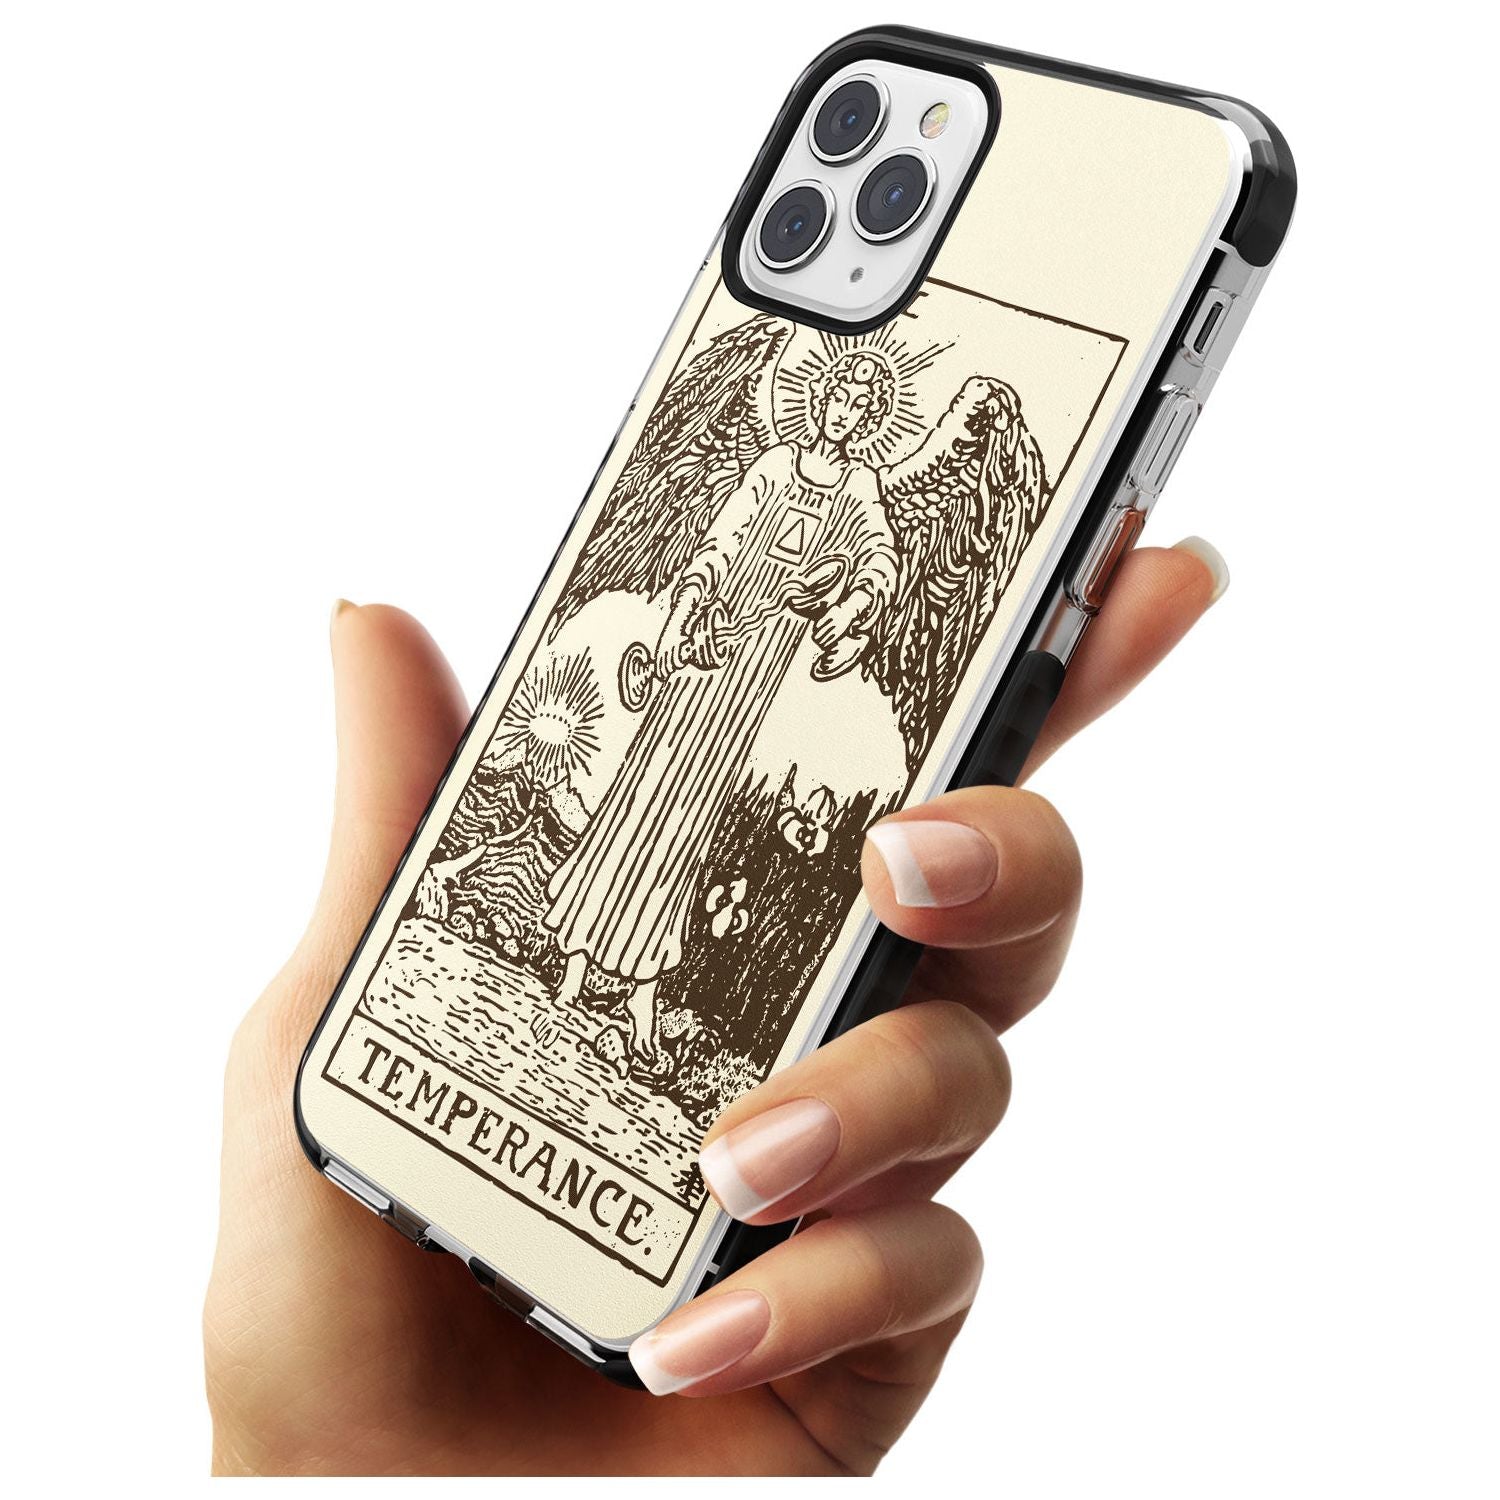 Temperance Tarot Card - Solid Cream Pink Fade Impact Phone Case for iPhone 11